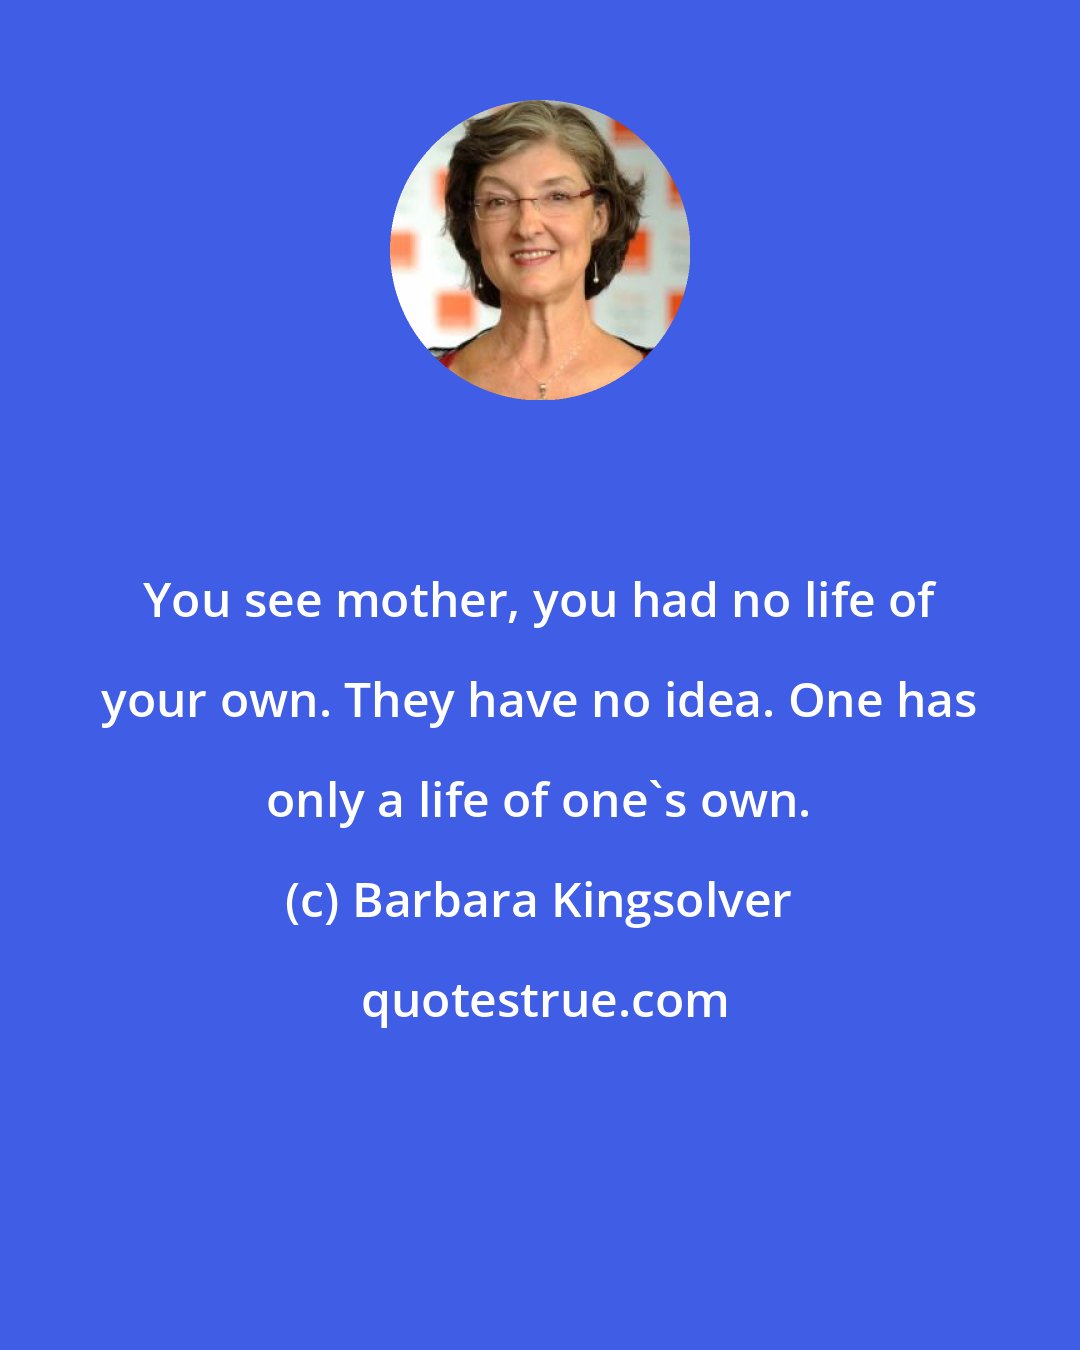 Barbara Kingsolver: You see mother, you had no life of your own. They have no idea. One has only a life of one's own.